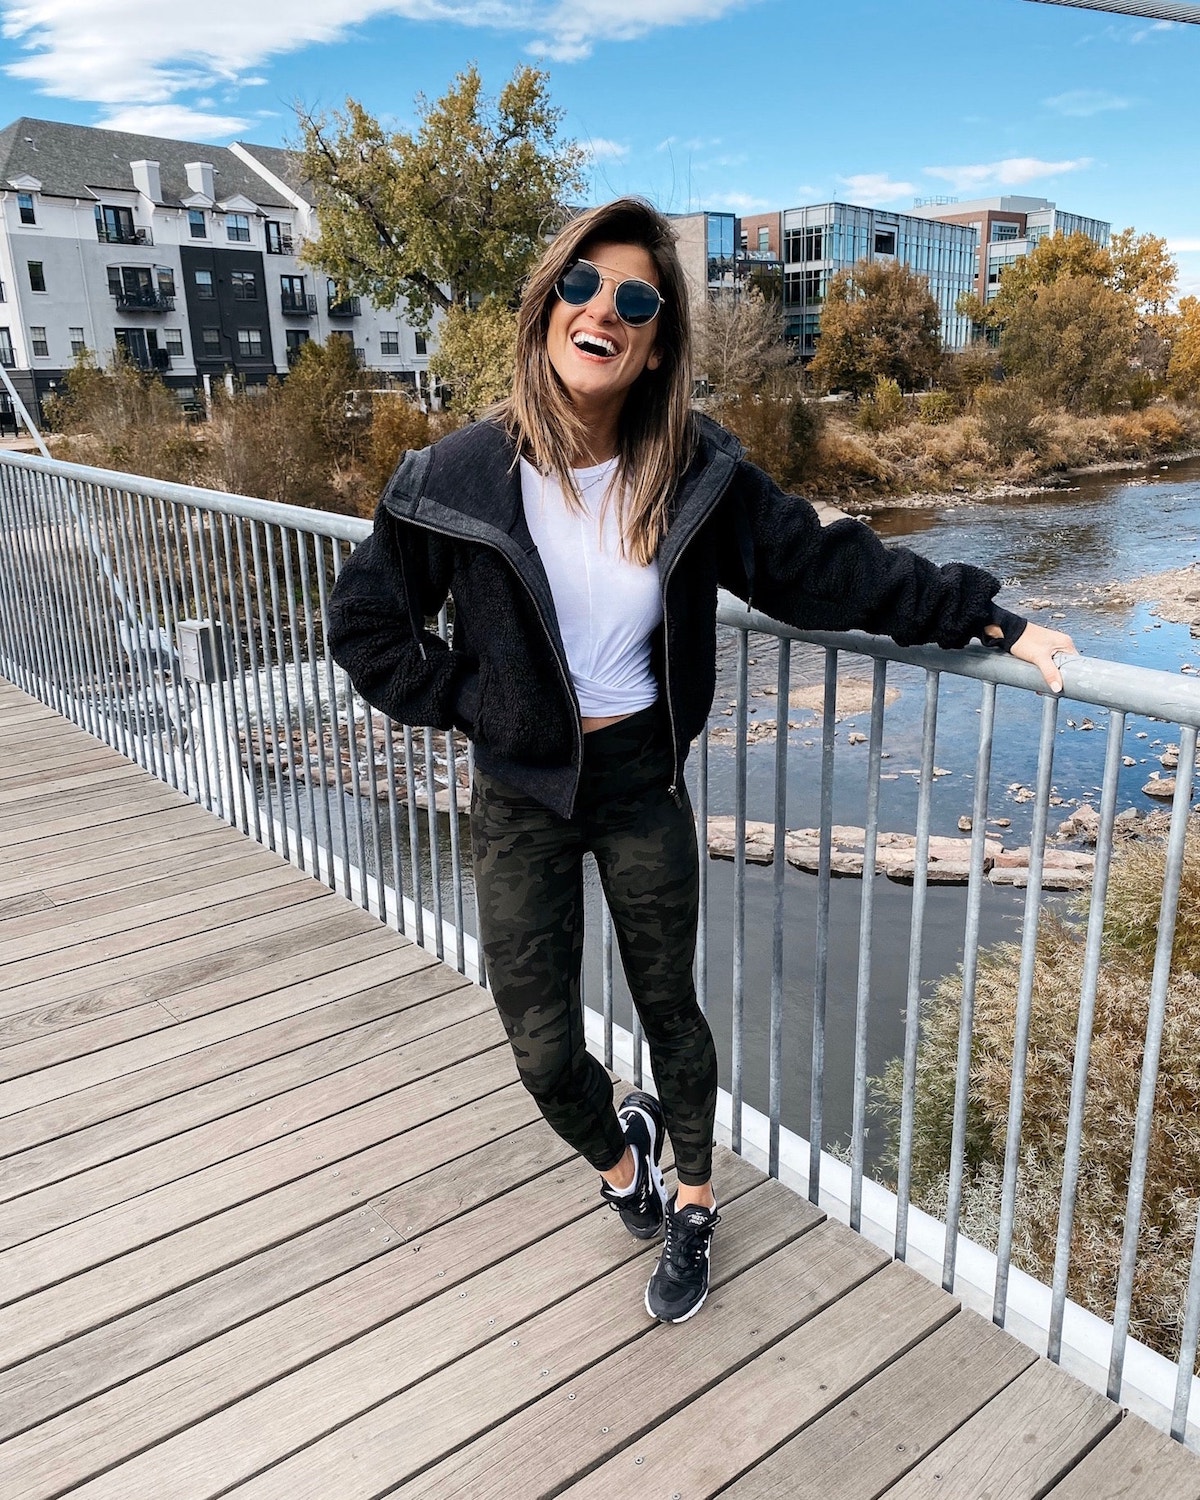 brighton Keller wearing Lululemon camo print align pant with sherpa jacket athleisure outfit